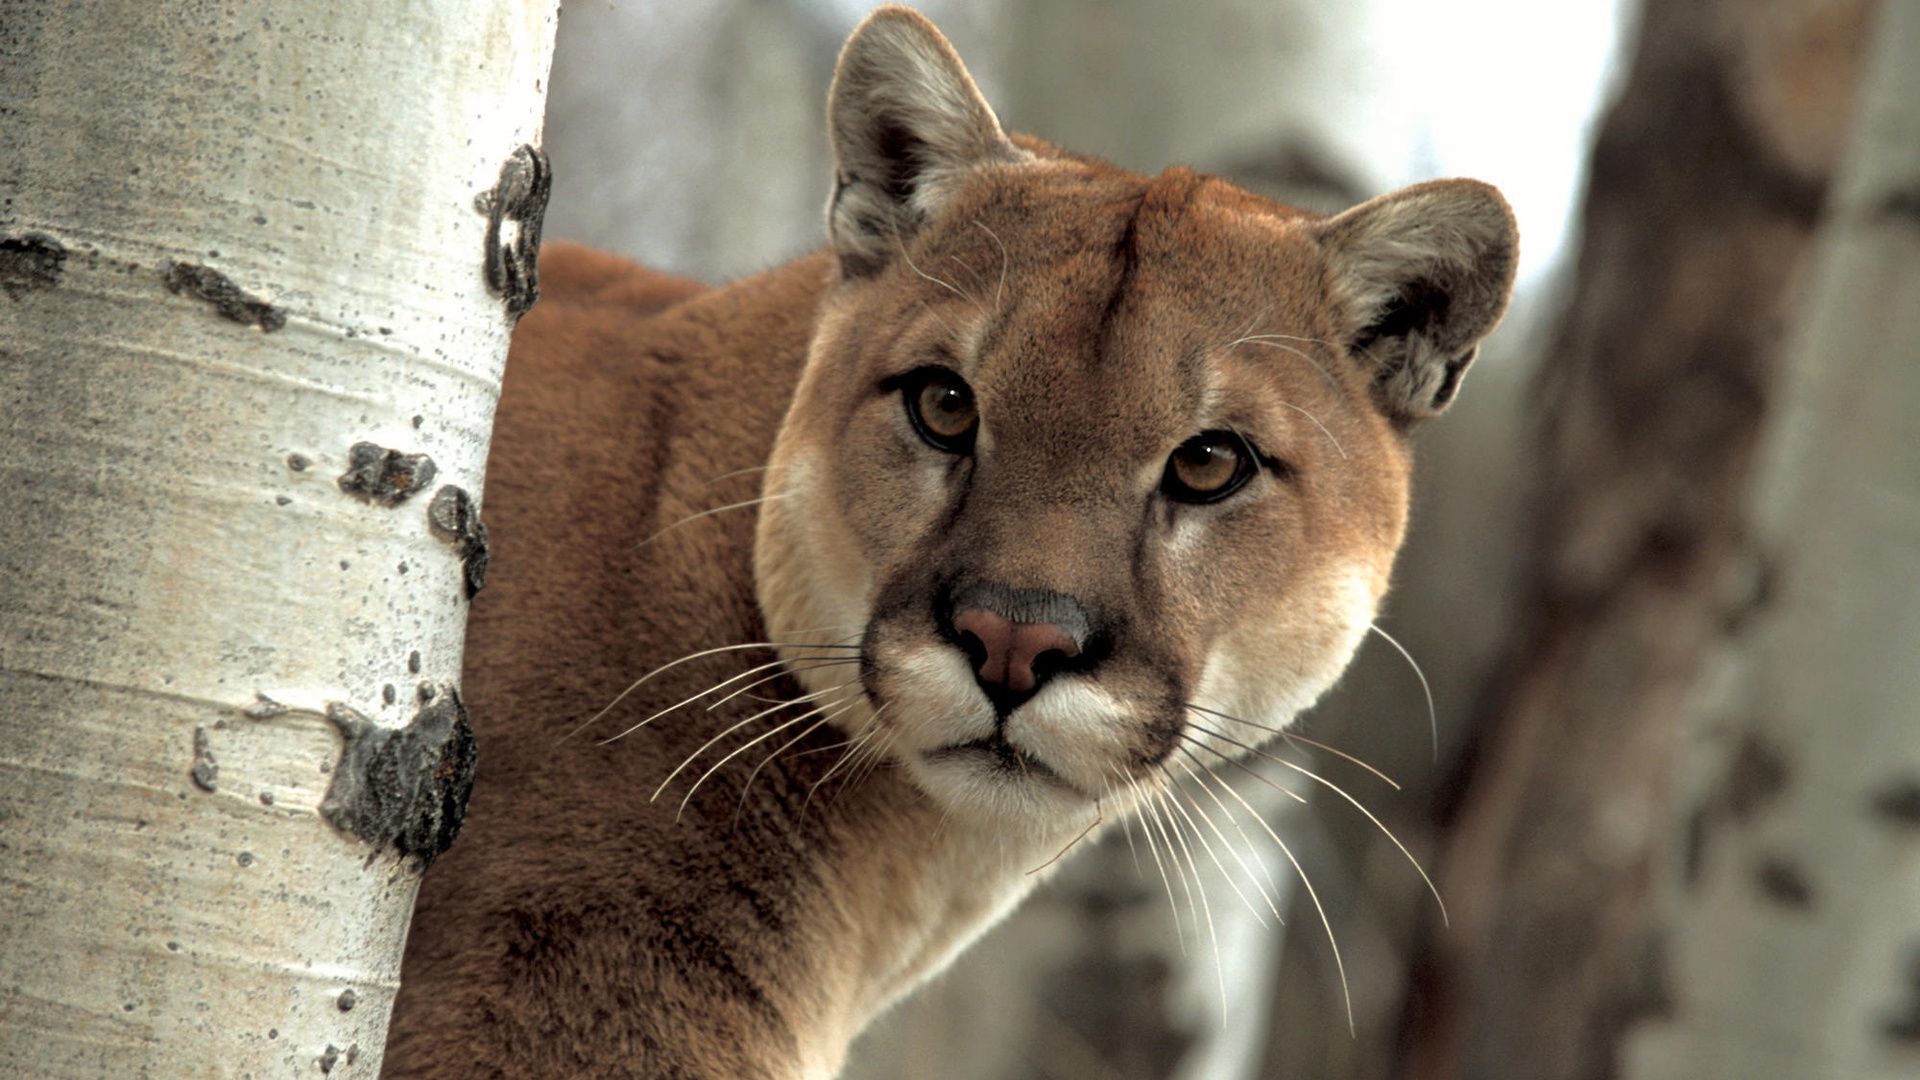 Cougar Hd picture free download